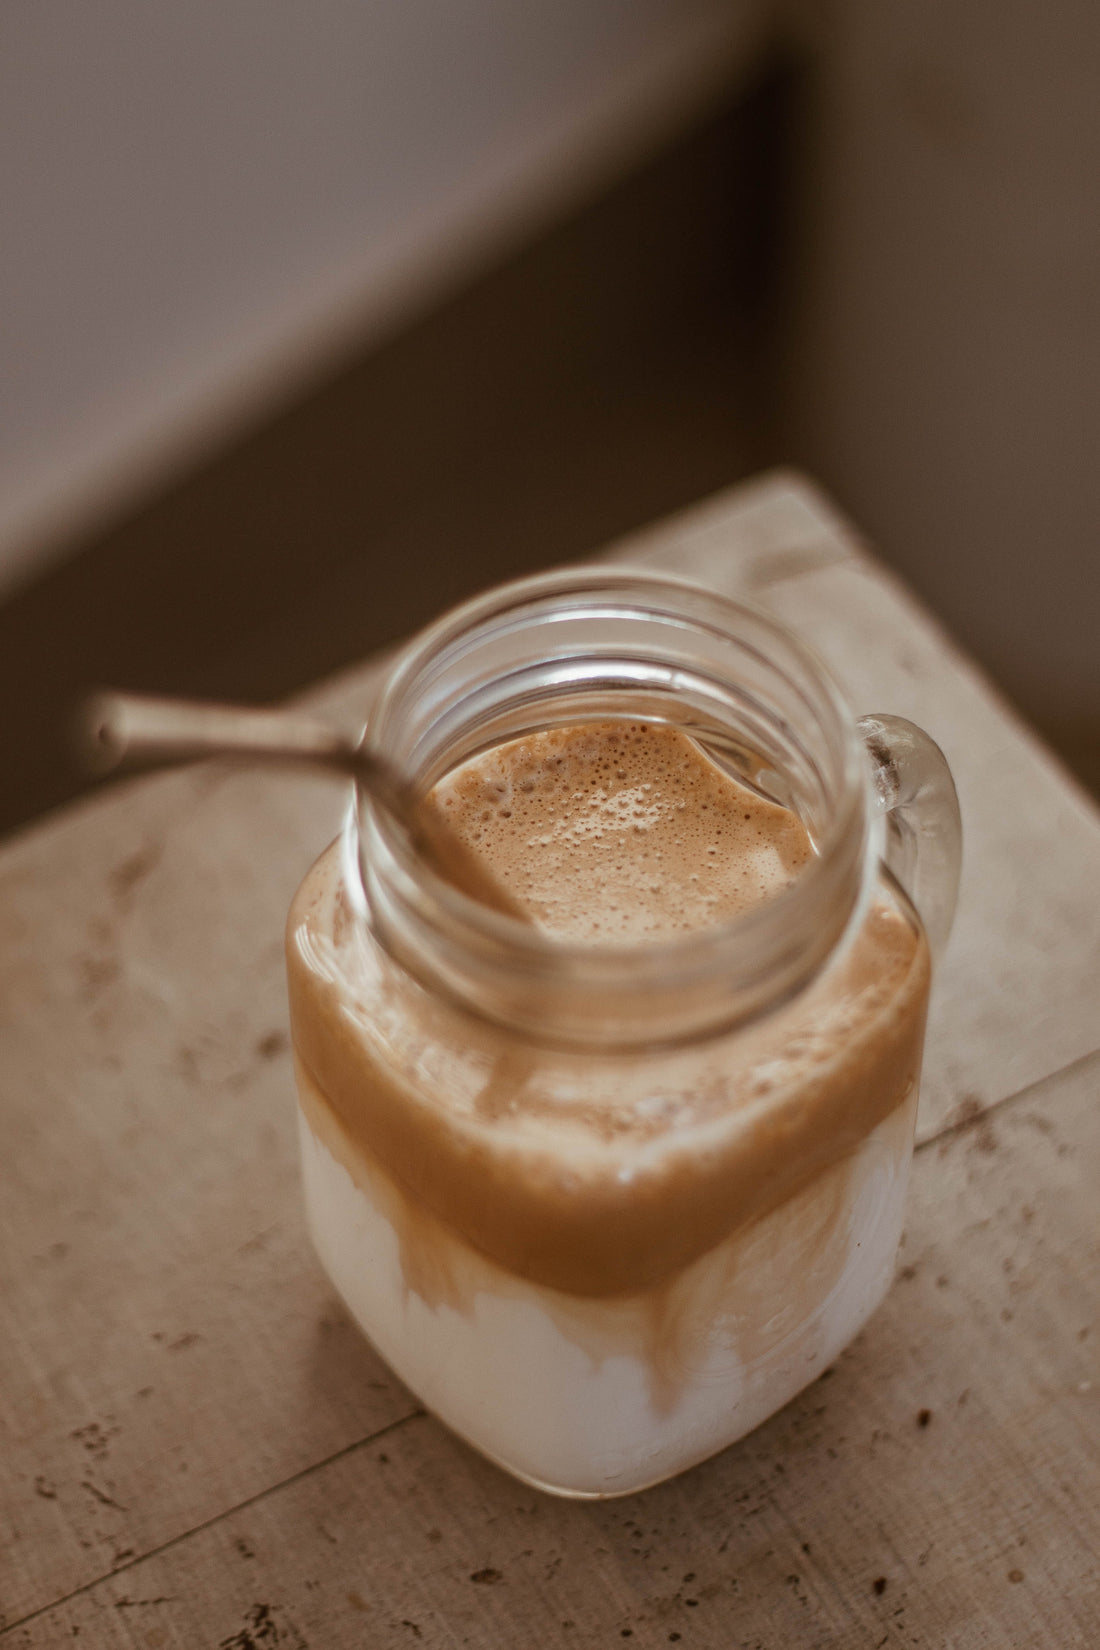 Peanut Butter Coffee - The Coffee Connect